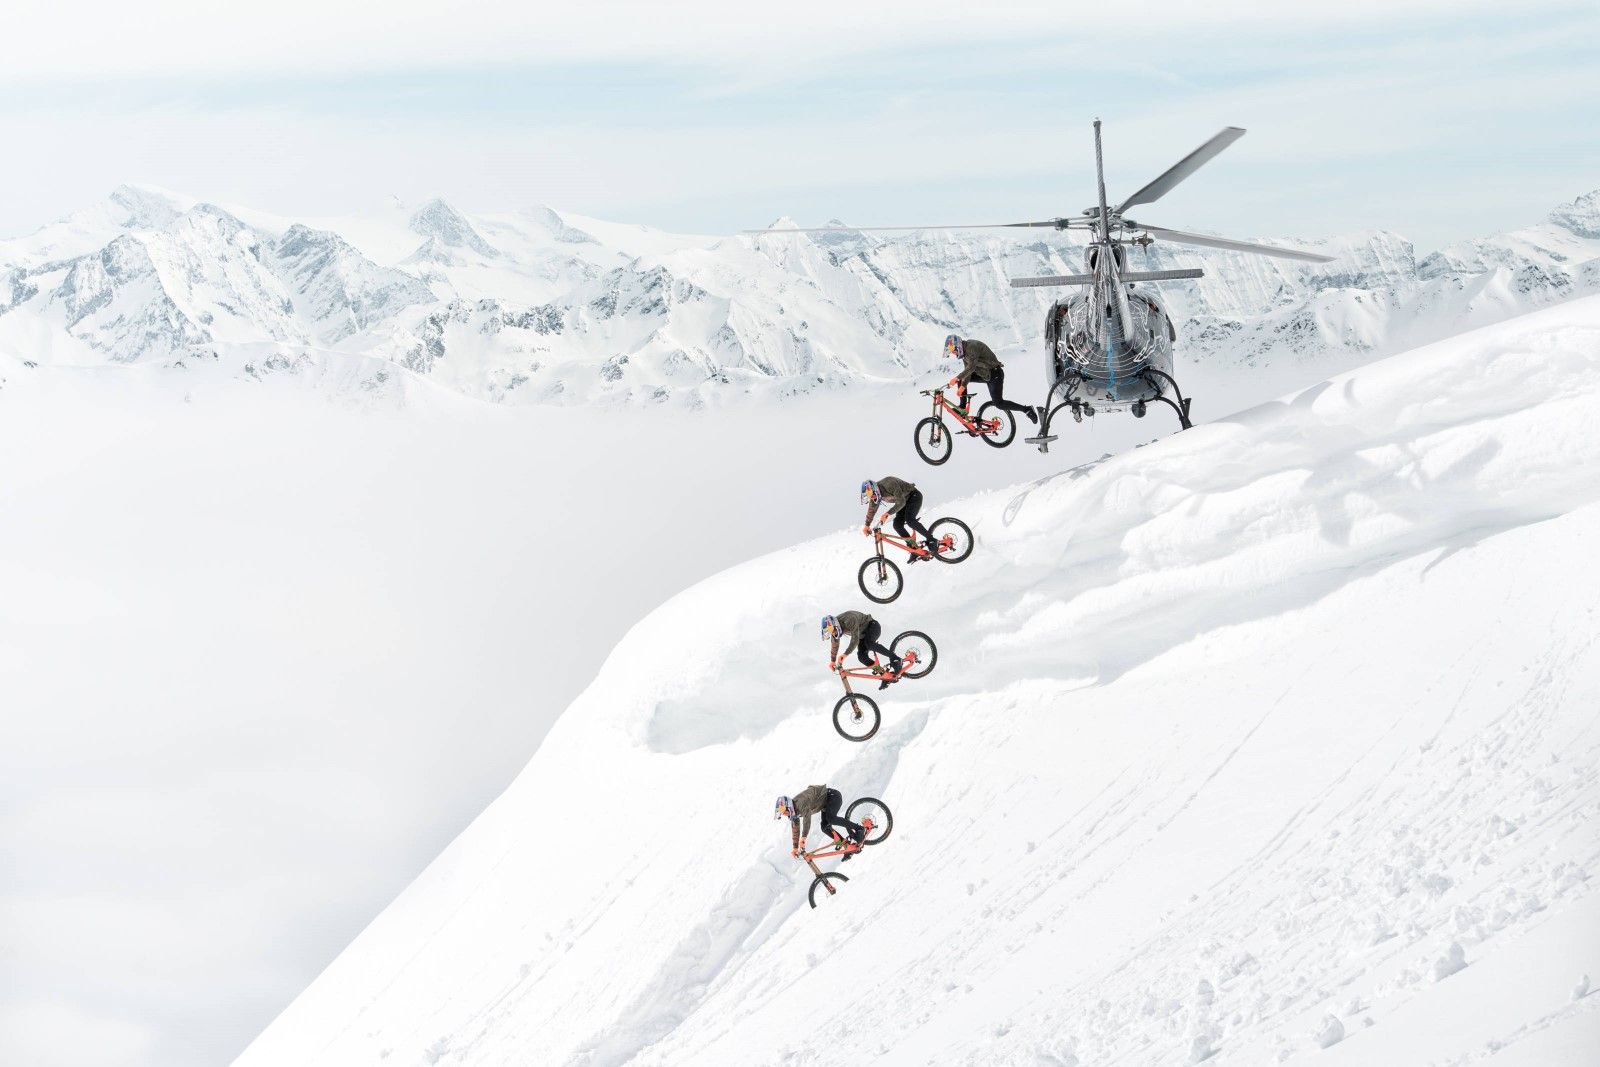 Amazing sequence photos make extreme sports even more awesome